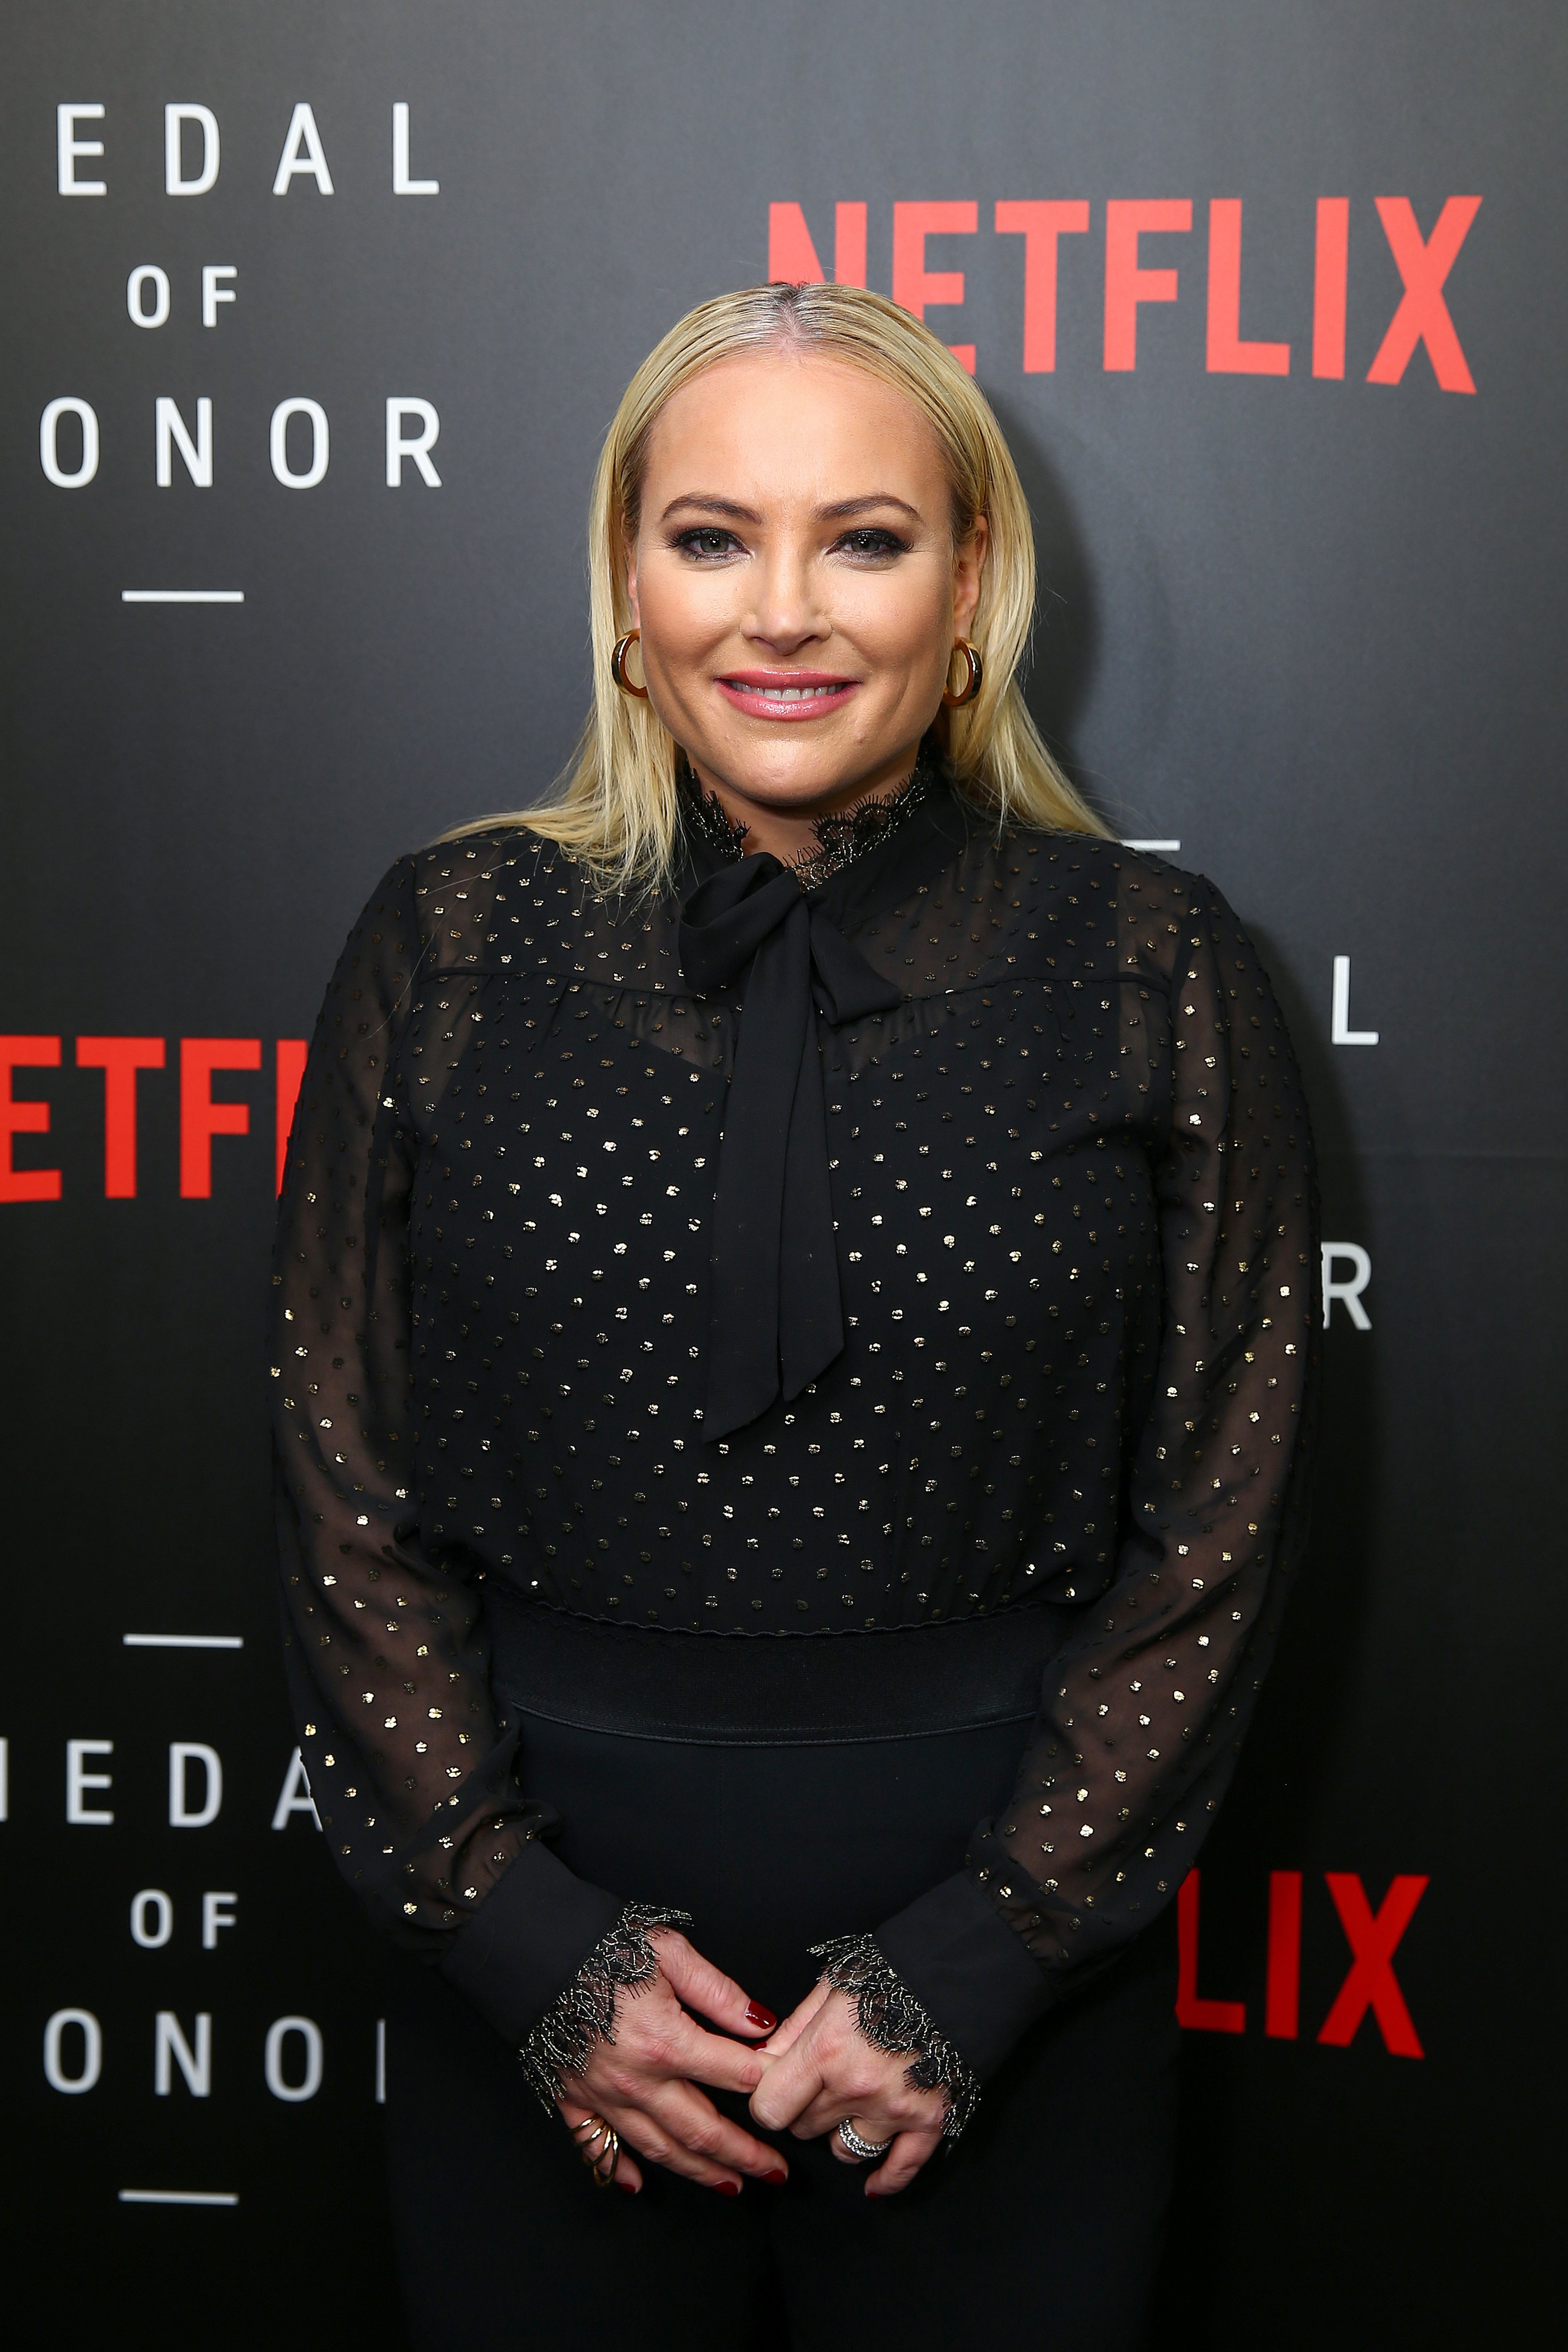 Meghan McCain attends the Netflix "Medal of Honor" screening and panel discussion in Washington on November 13, 2018 | Photo: Getty Images